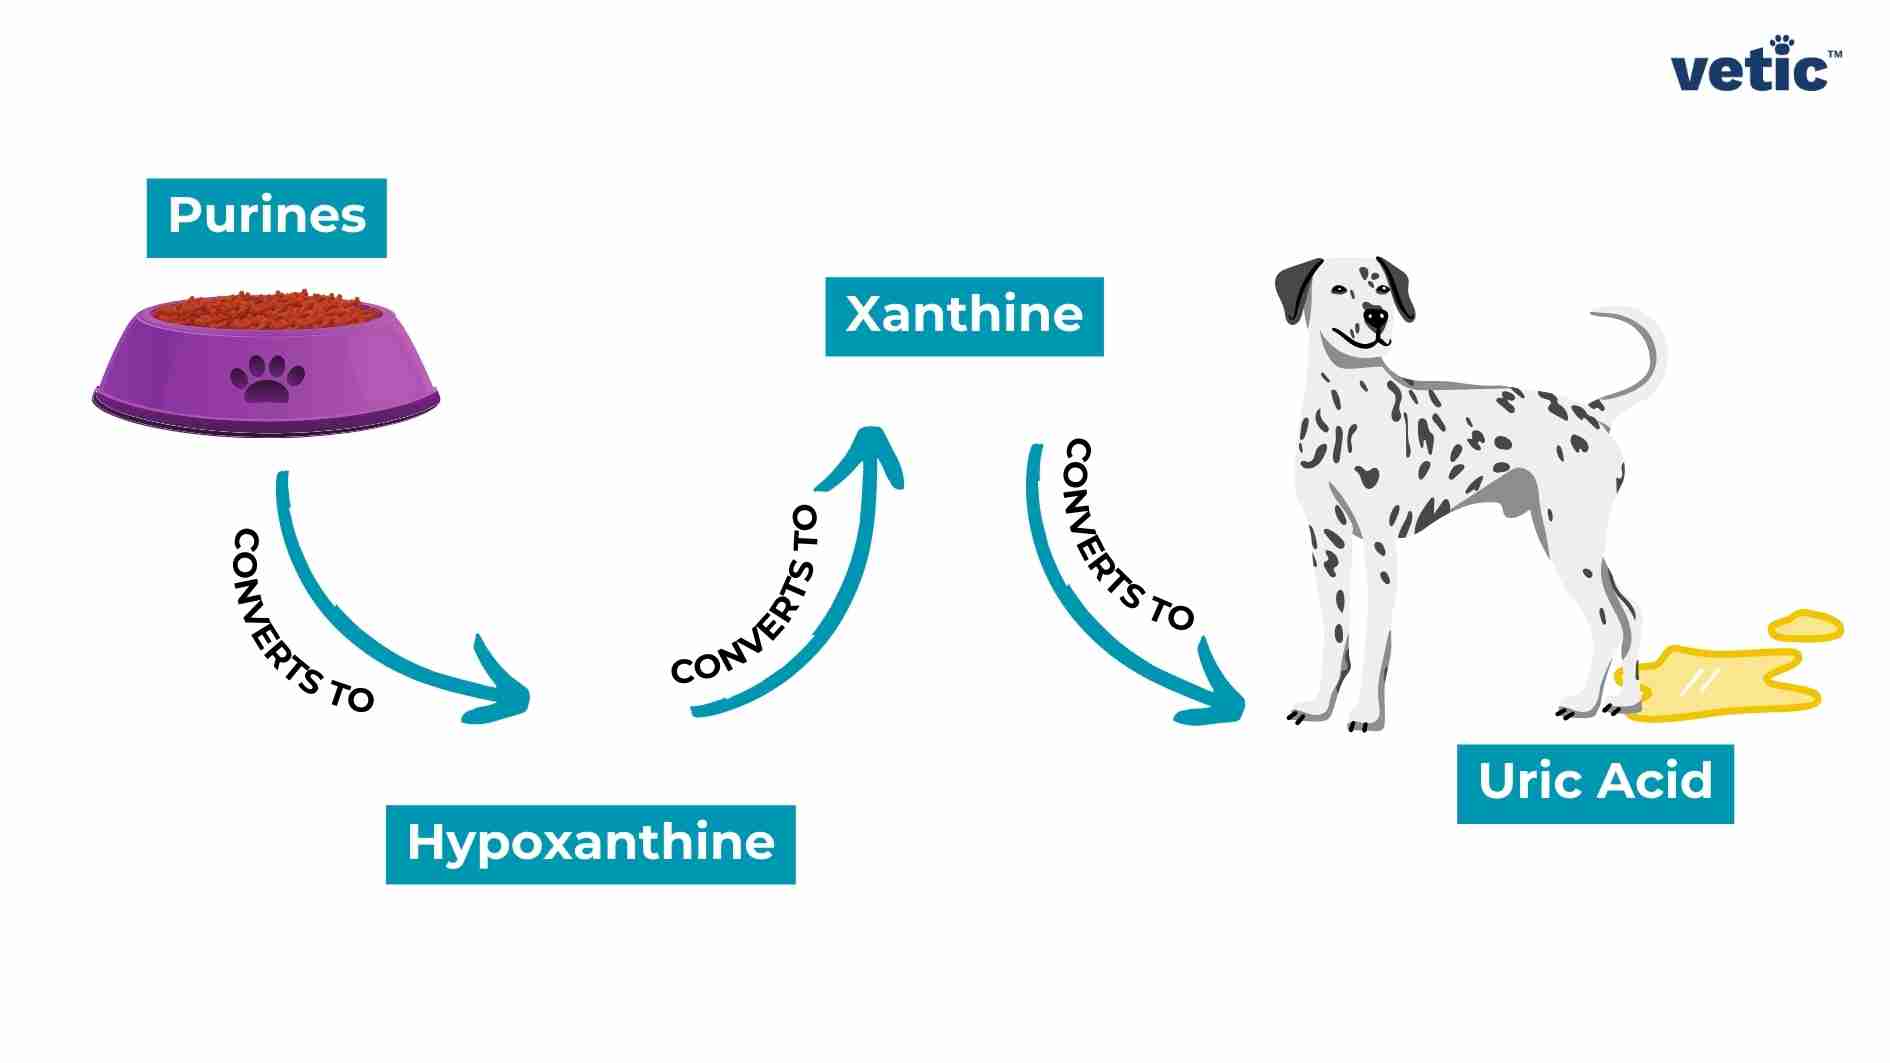 The image is an infographic on Uroliths in Dalmatians; explaining the metabolic process of converting purines to uric acid in dogs. On the left, there is a purple bowl filled with dog food labeled “Purines.” Arrows labeled “CONVERTS TO” show the conversion process from purines to hypoxanthine, then to xanthine, and finally to uric acid. “Hypoxanthine” and “Xanthine” are written in blue text boxes connected by arrows indicating their conversion sequence. On the right side of the image, there’s a cartoon depiction of a grey dog with a yellow collar. The dog appears to be peeing, representing the excretion of uric acid.